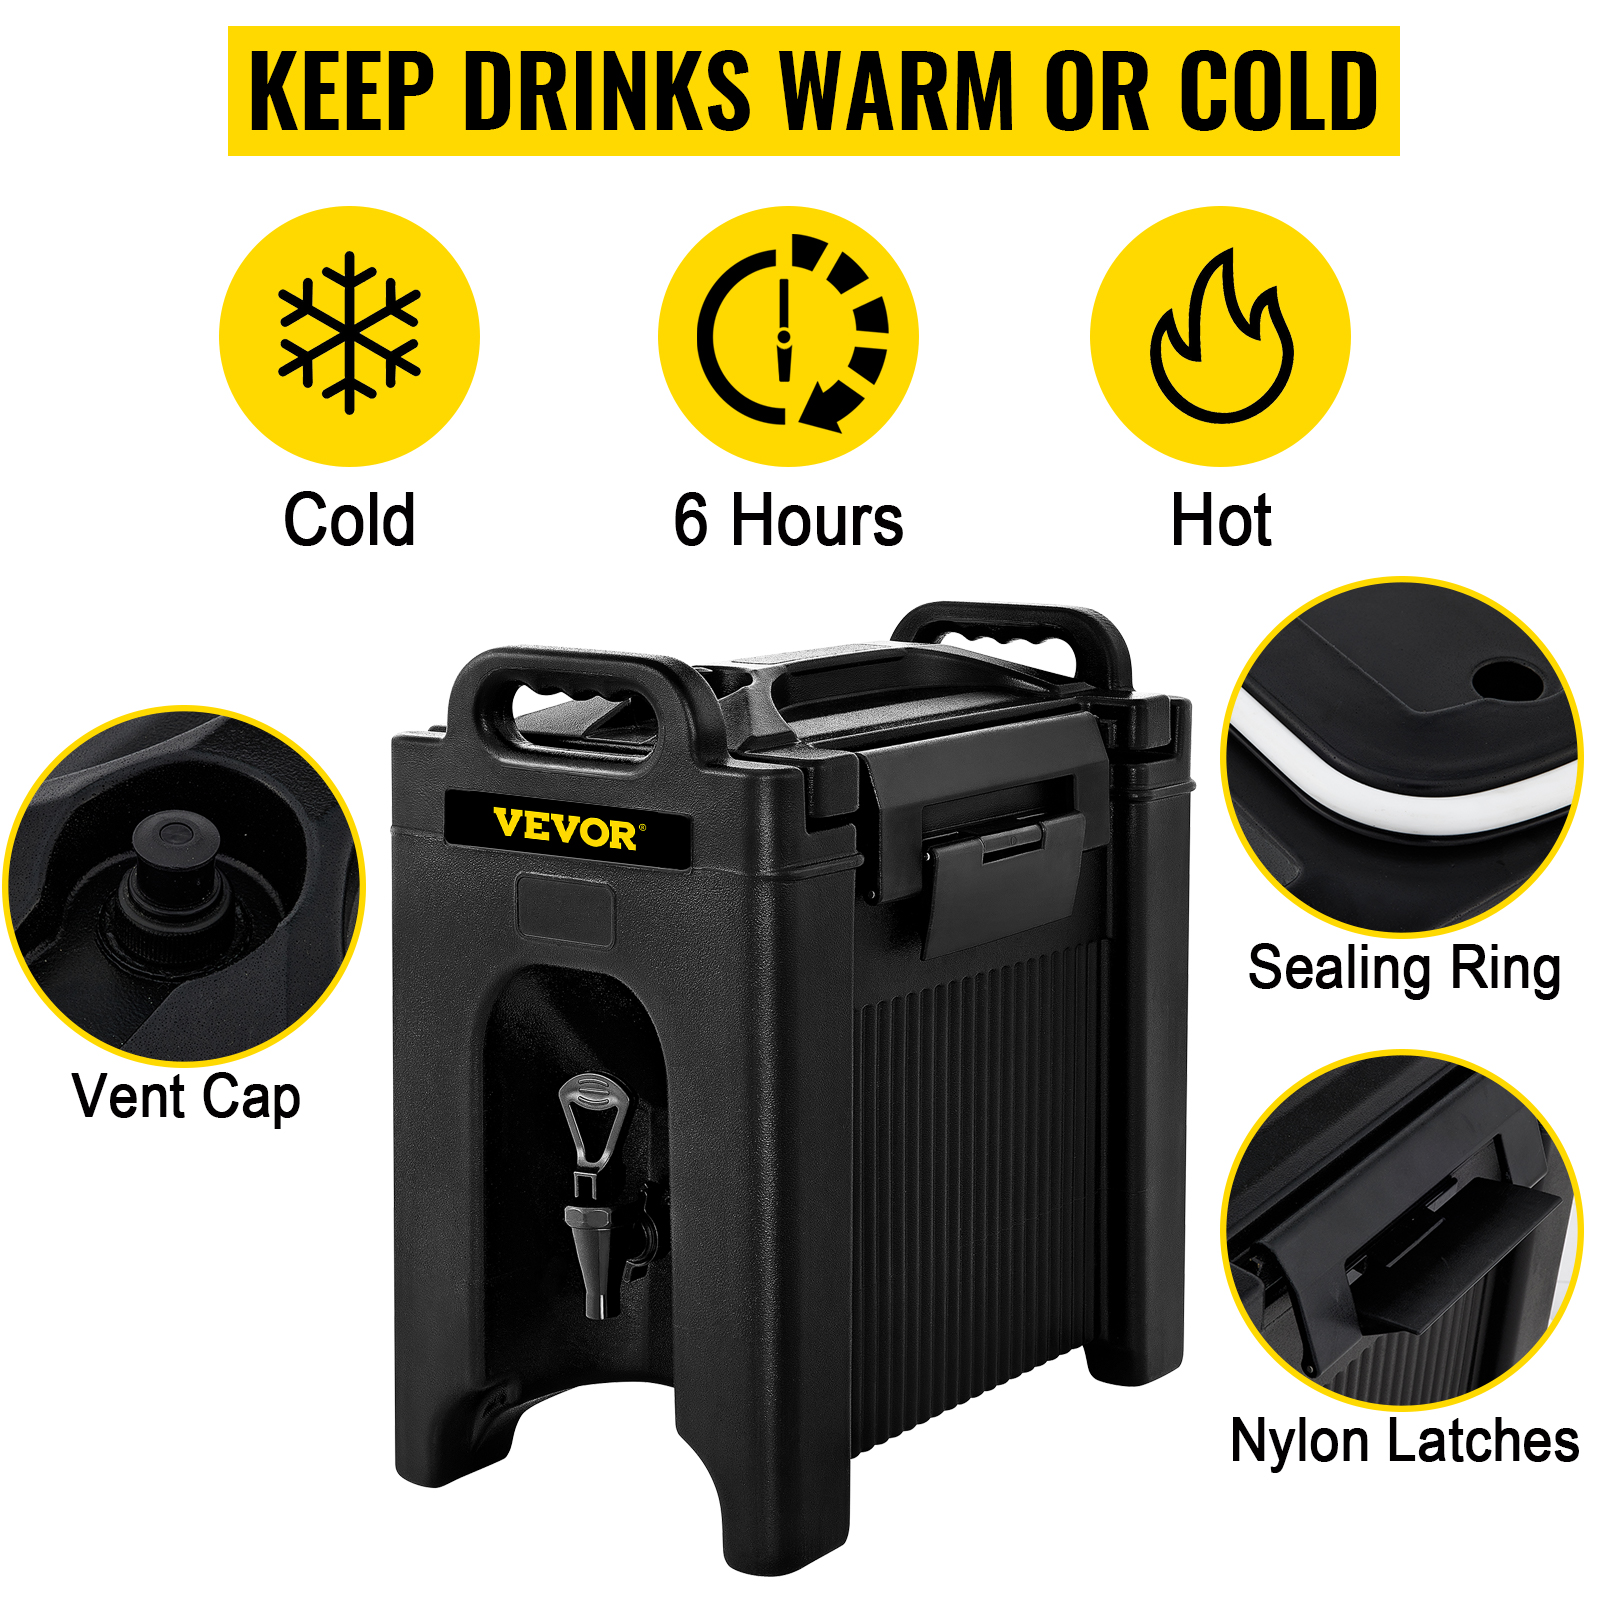 VEVOR Insulated Beverage Dispenser 5 Gallon Food-grade LDPE Hot and Cold Beverage Server Thermal Drink Dispenser Cooler with 0.9 in PU Layer